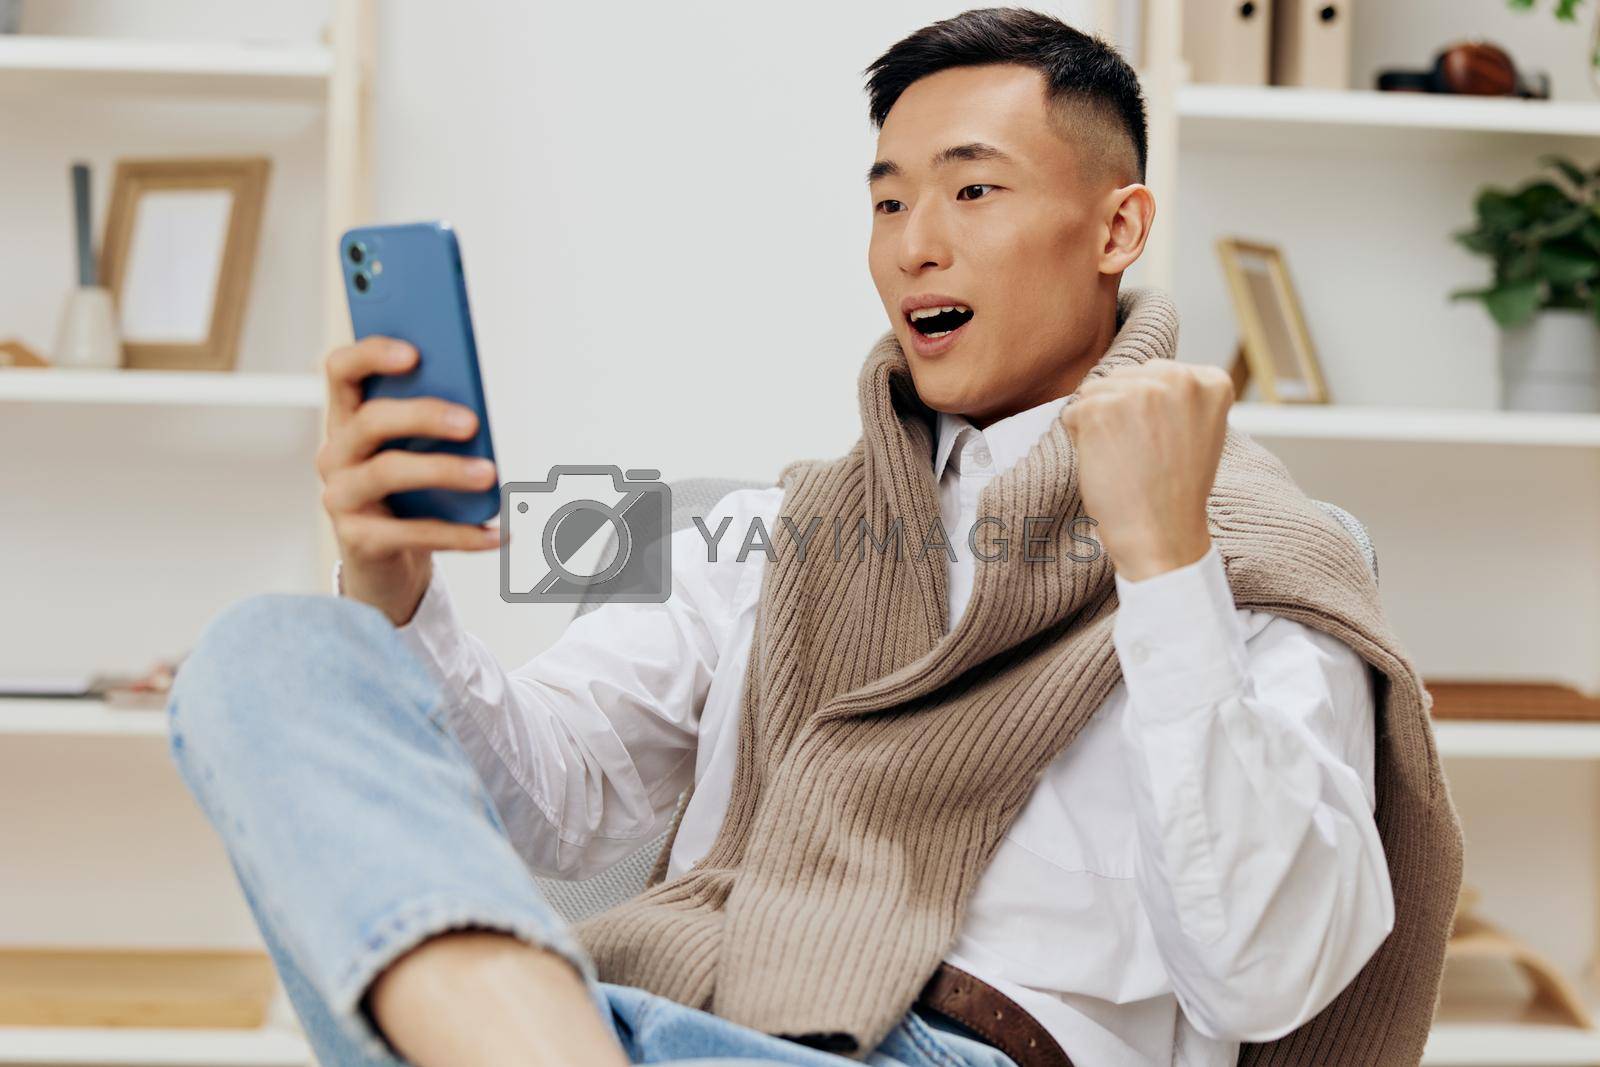 teenager communication with the phone in his hands sits on a chair interior Lifestyle work. High quality photo